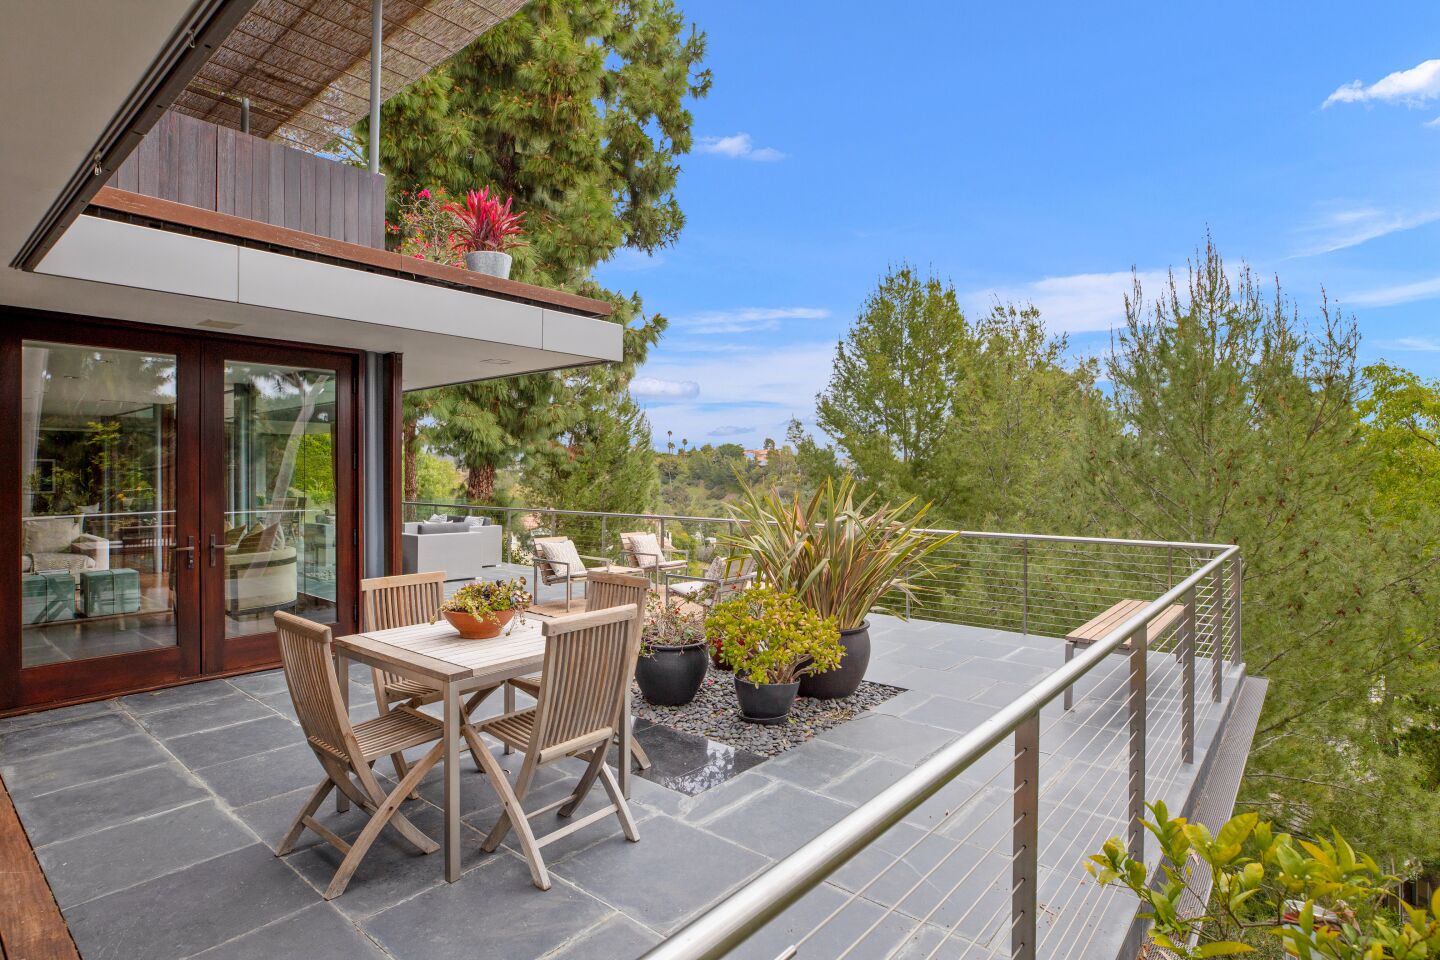 The decking includes a dining patio.